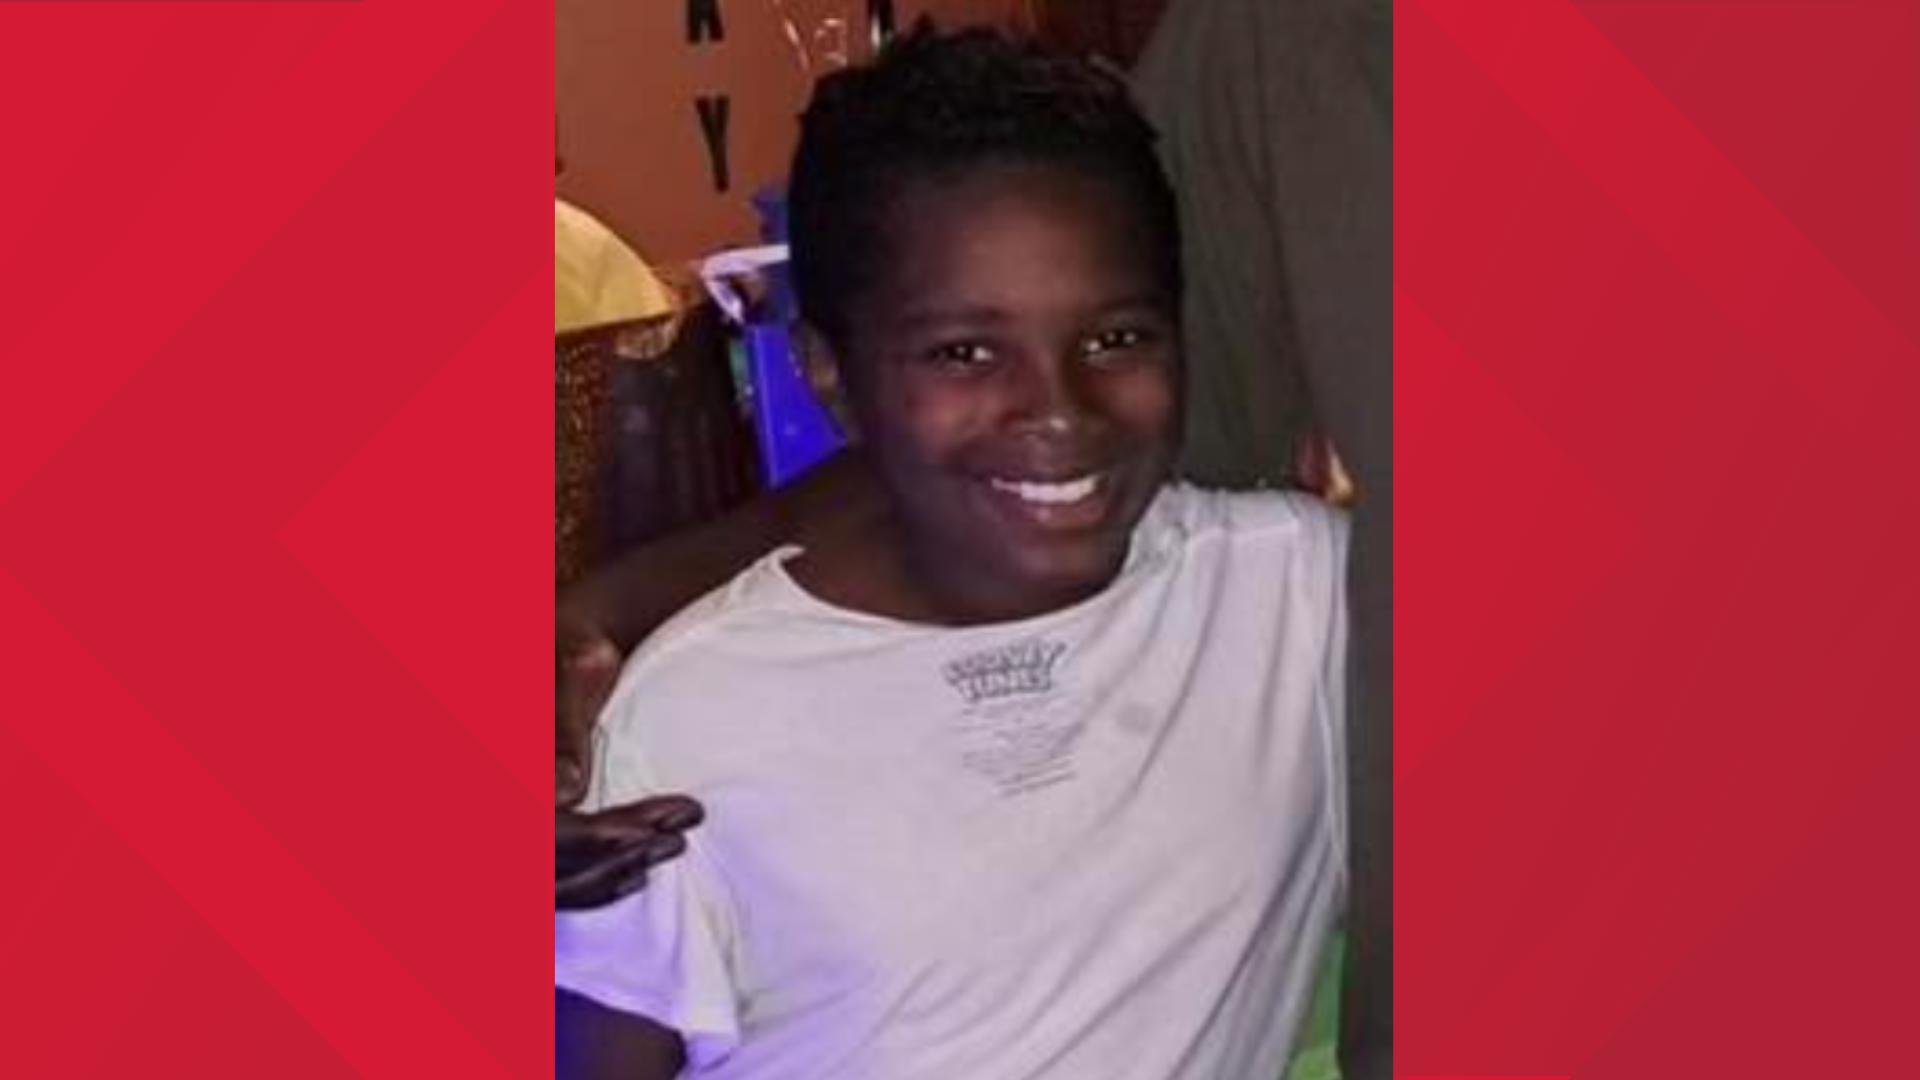 The Moline Police Department is asking for the public's help locating 13-year-old Kyrese A. Rogers.